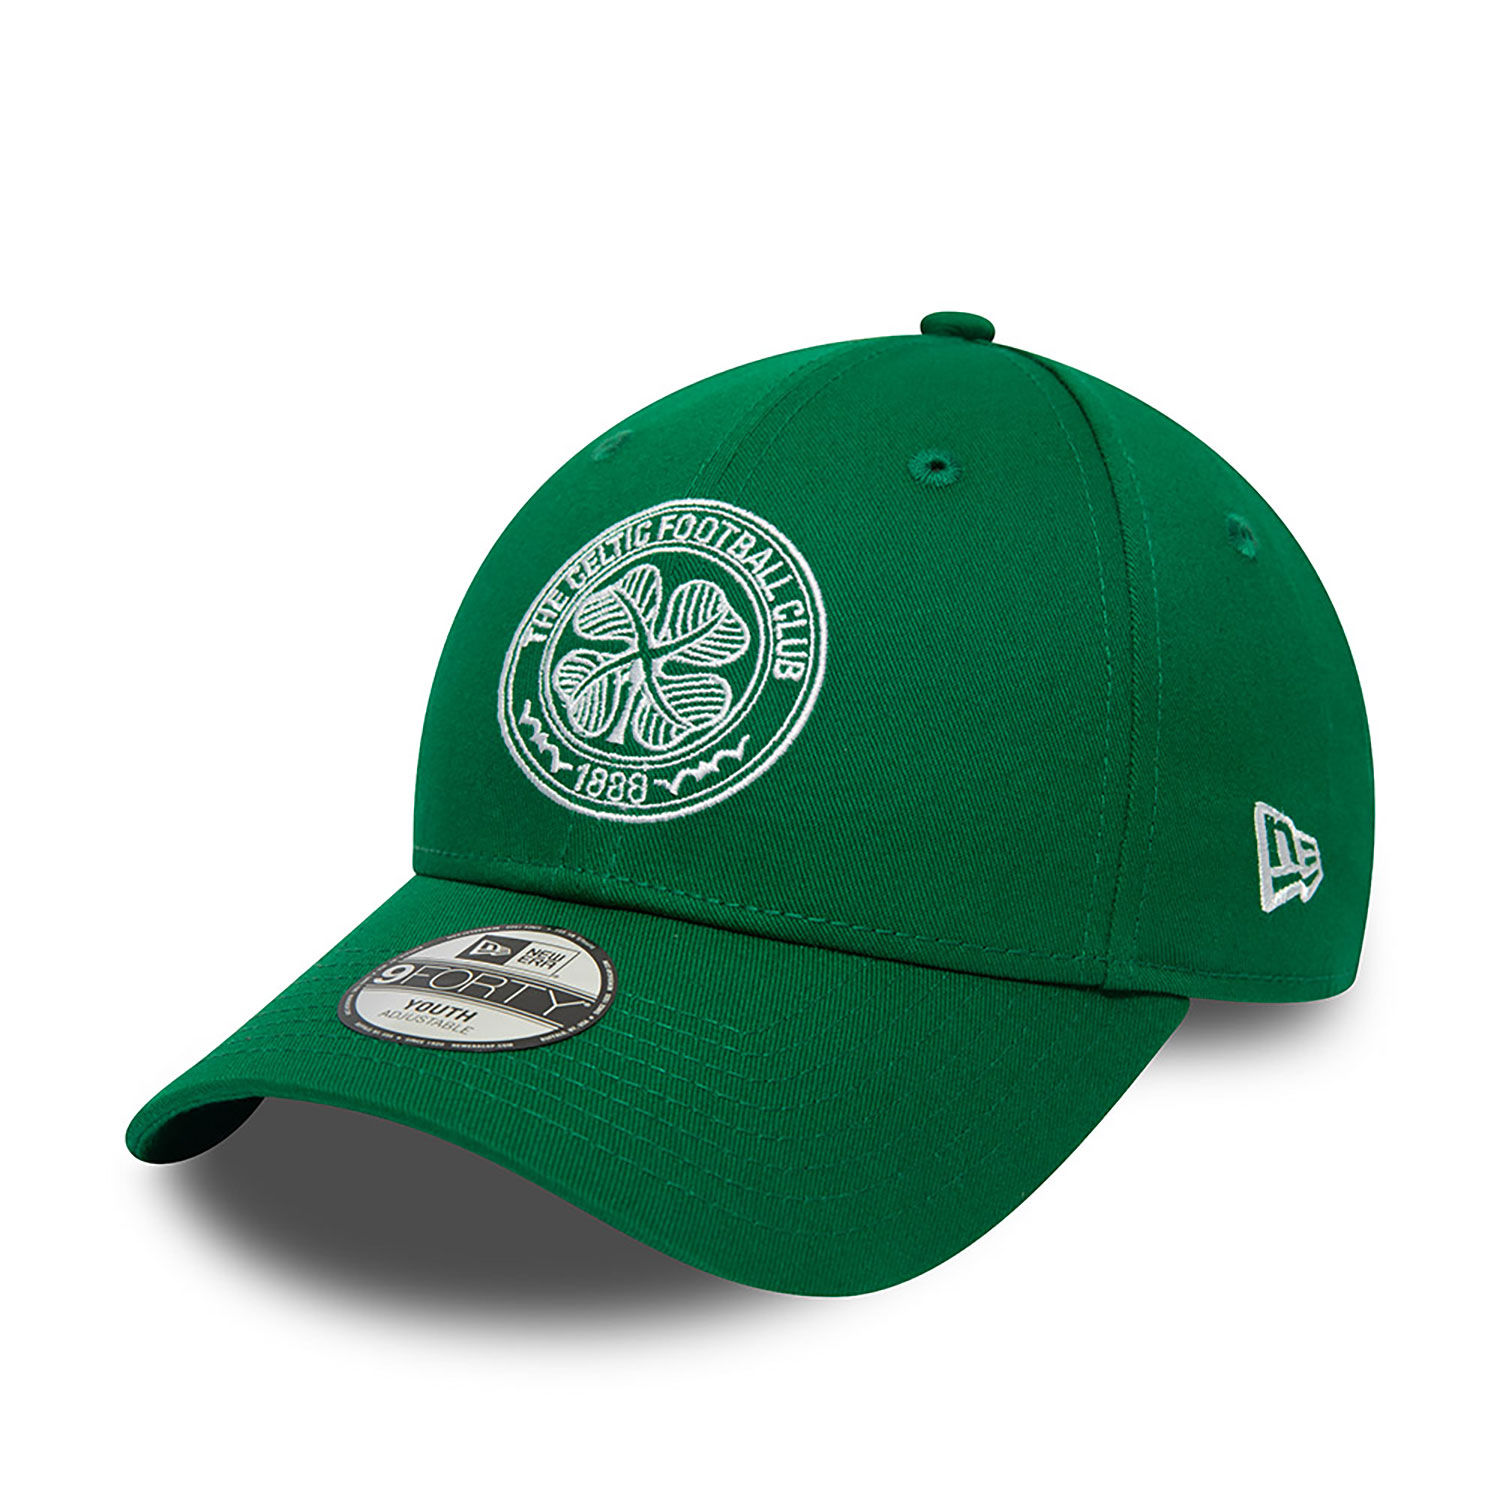 Celtic FC Green Youth 9FORTY Adjustable Cap